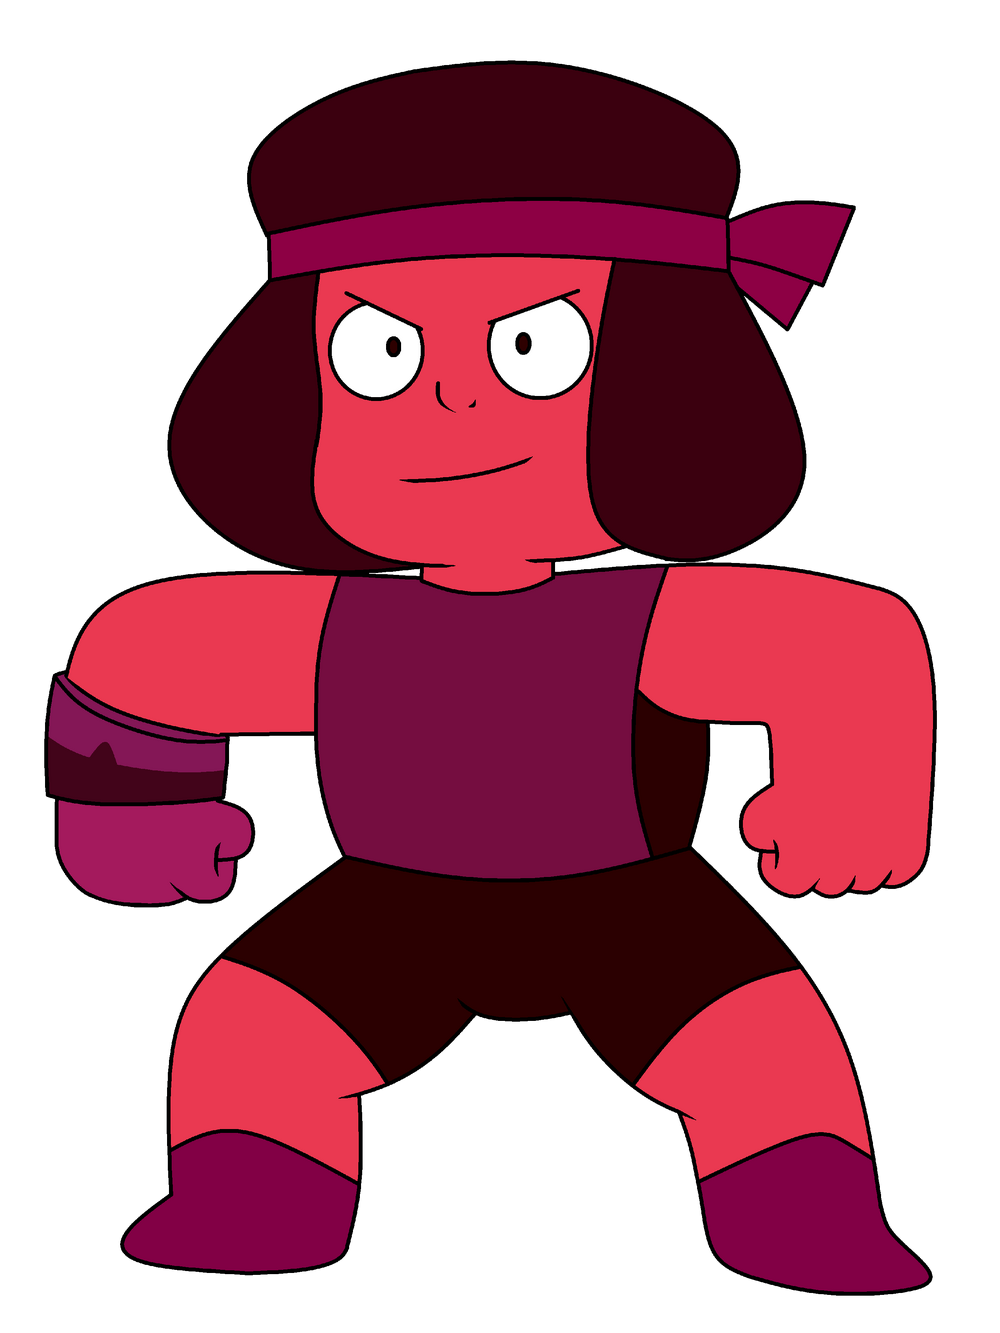 https://vignette4.wikia.nocookie.net/steven-universe/images/f/f6/Ruby_-_Weaponized.png/revision/latest/scale-to-width-down/1000?cb=20160606051342